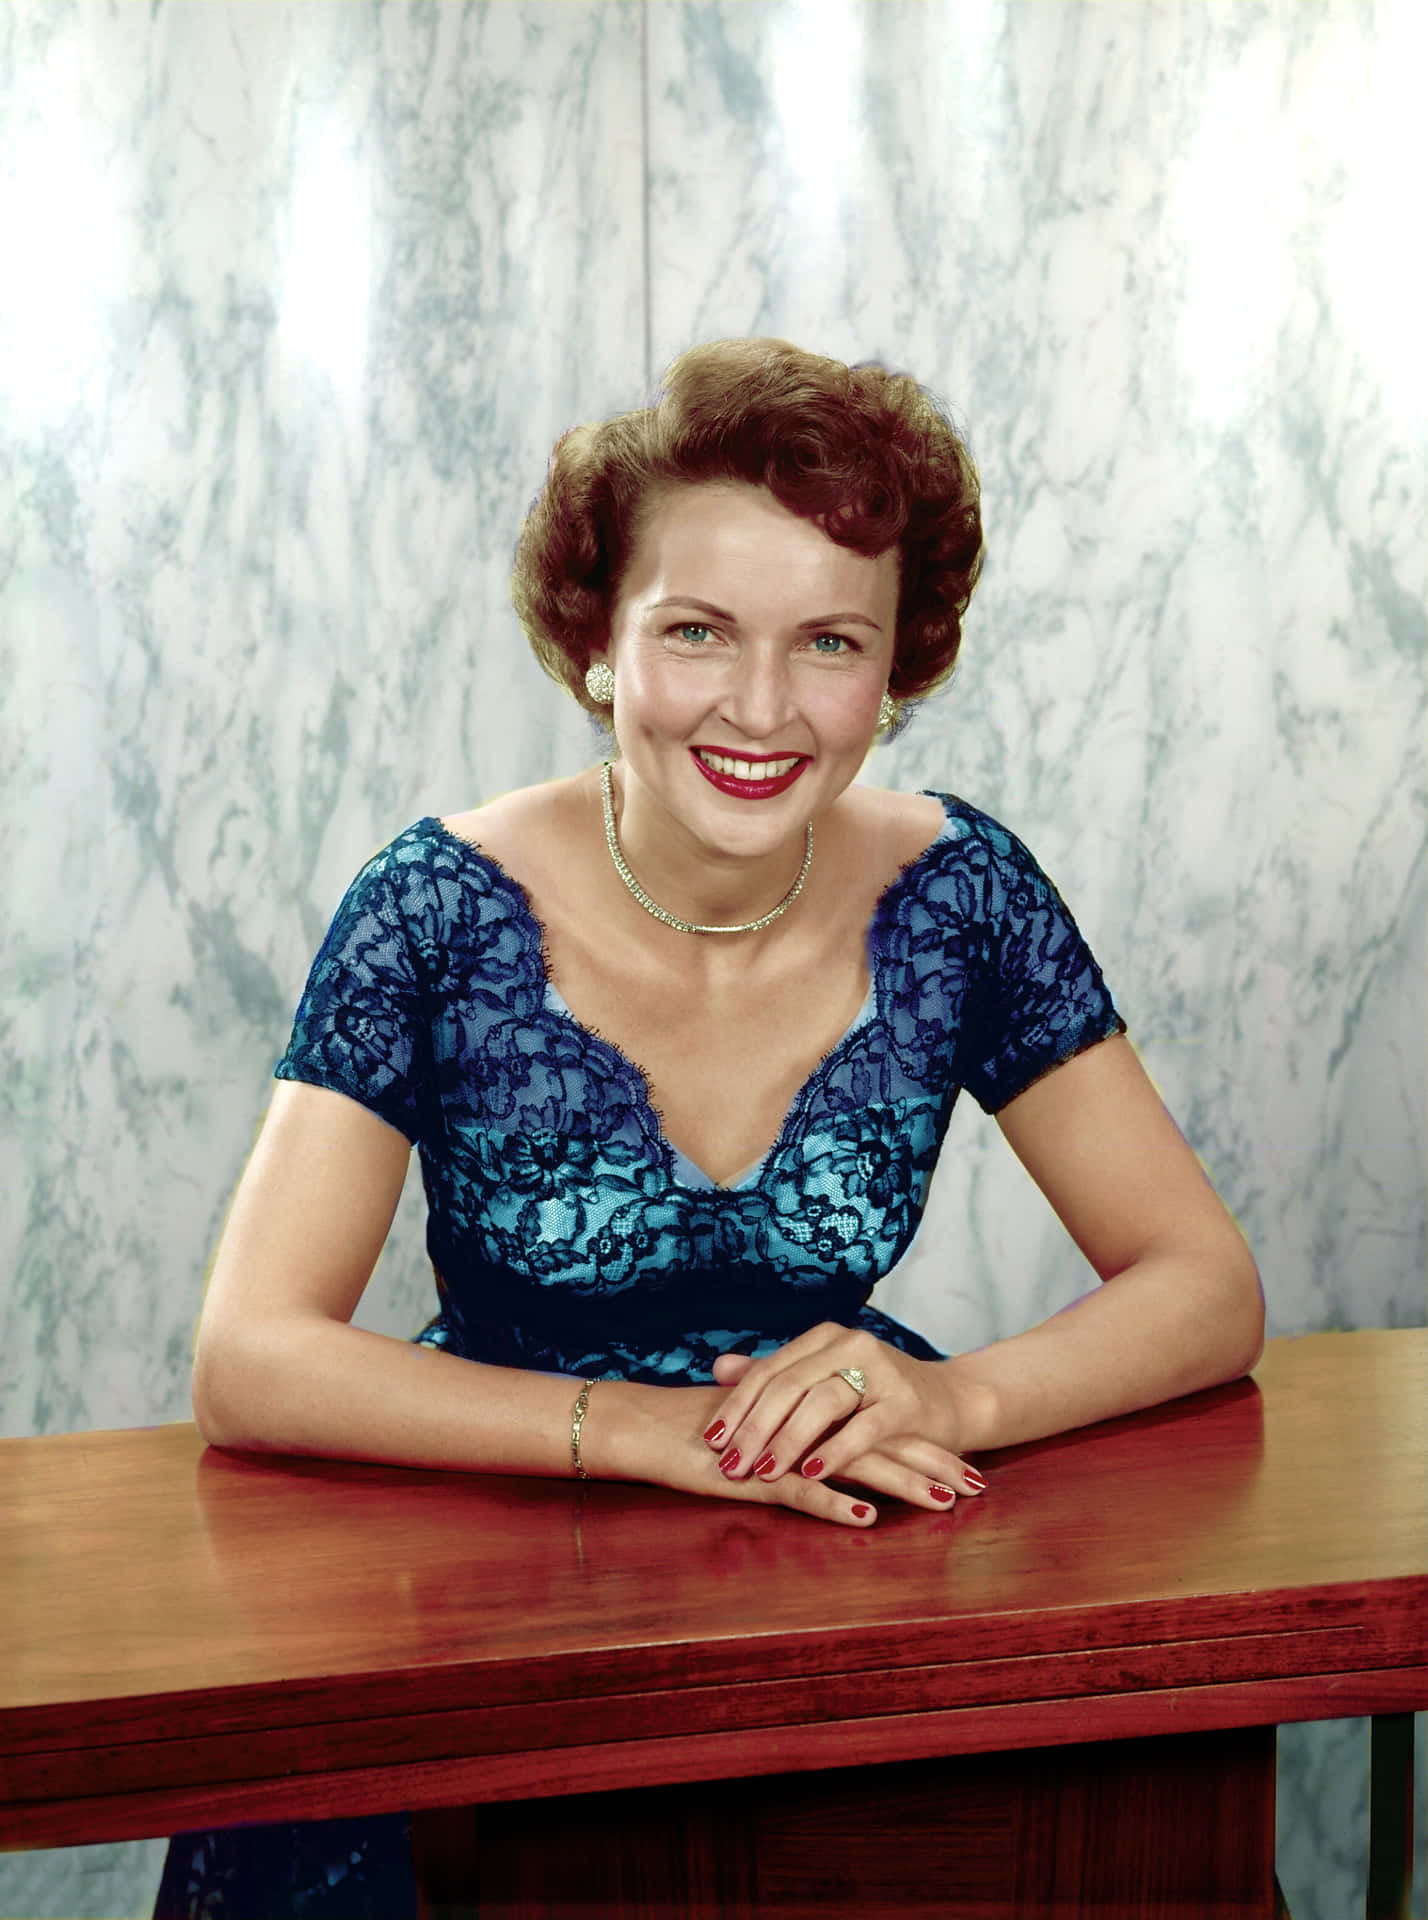 Iconic Actress Betty White Smiling Radiantly in a Vintage Outfit